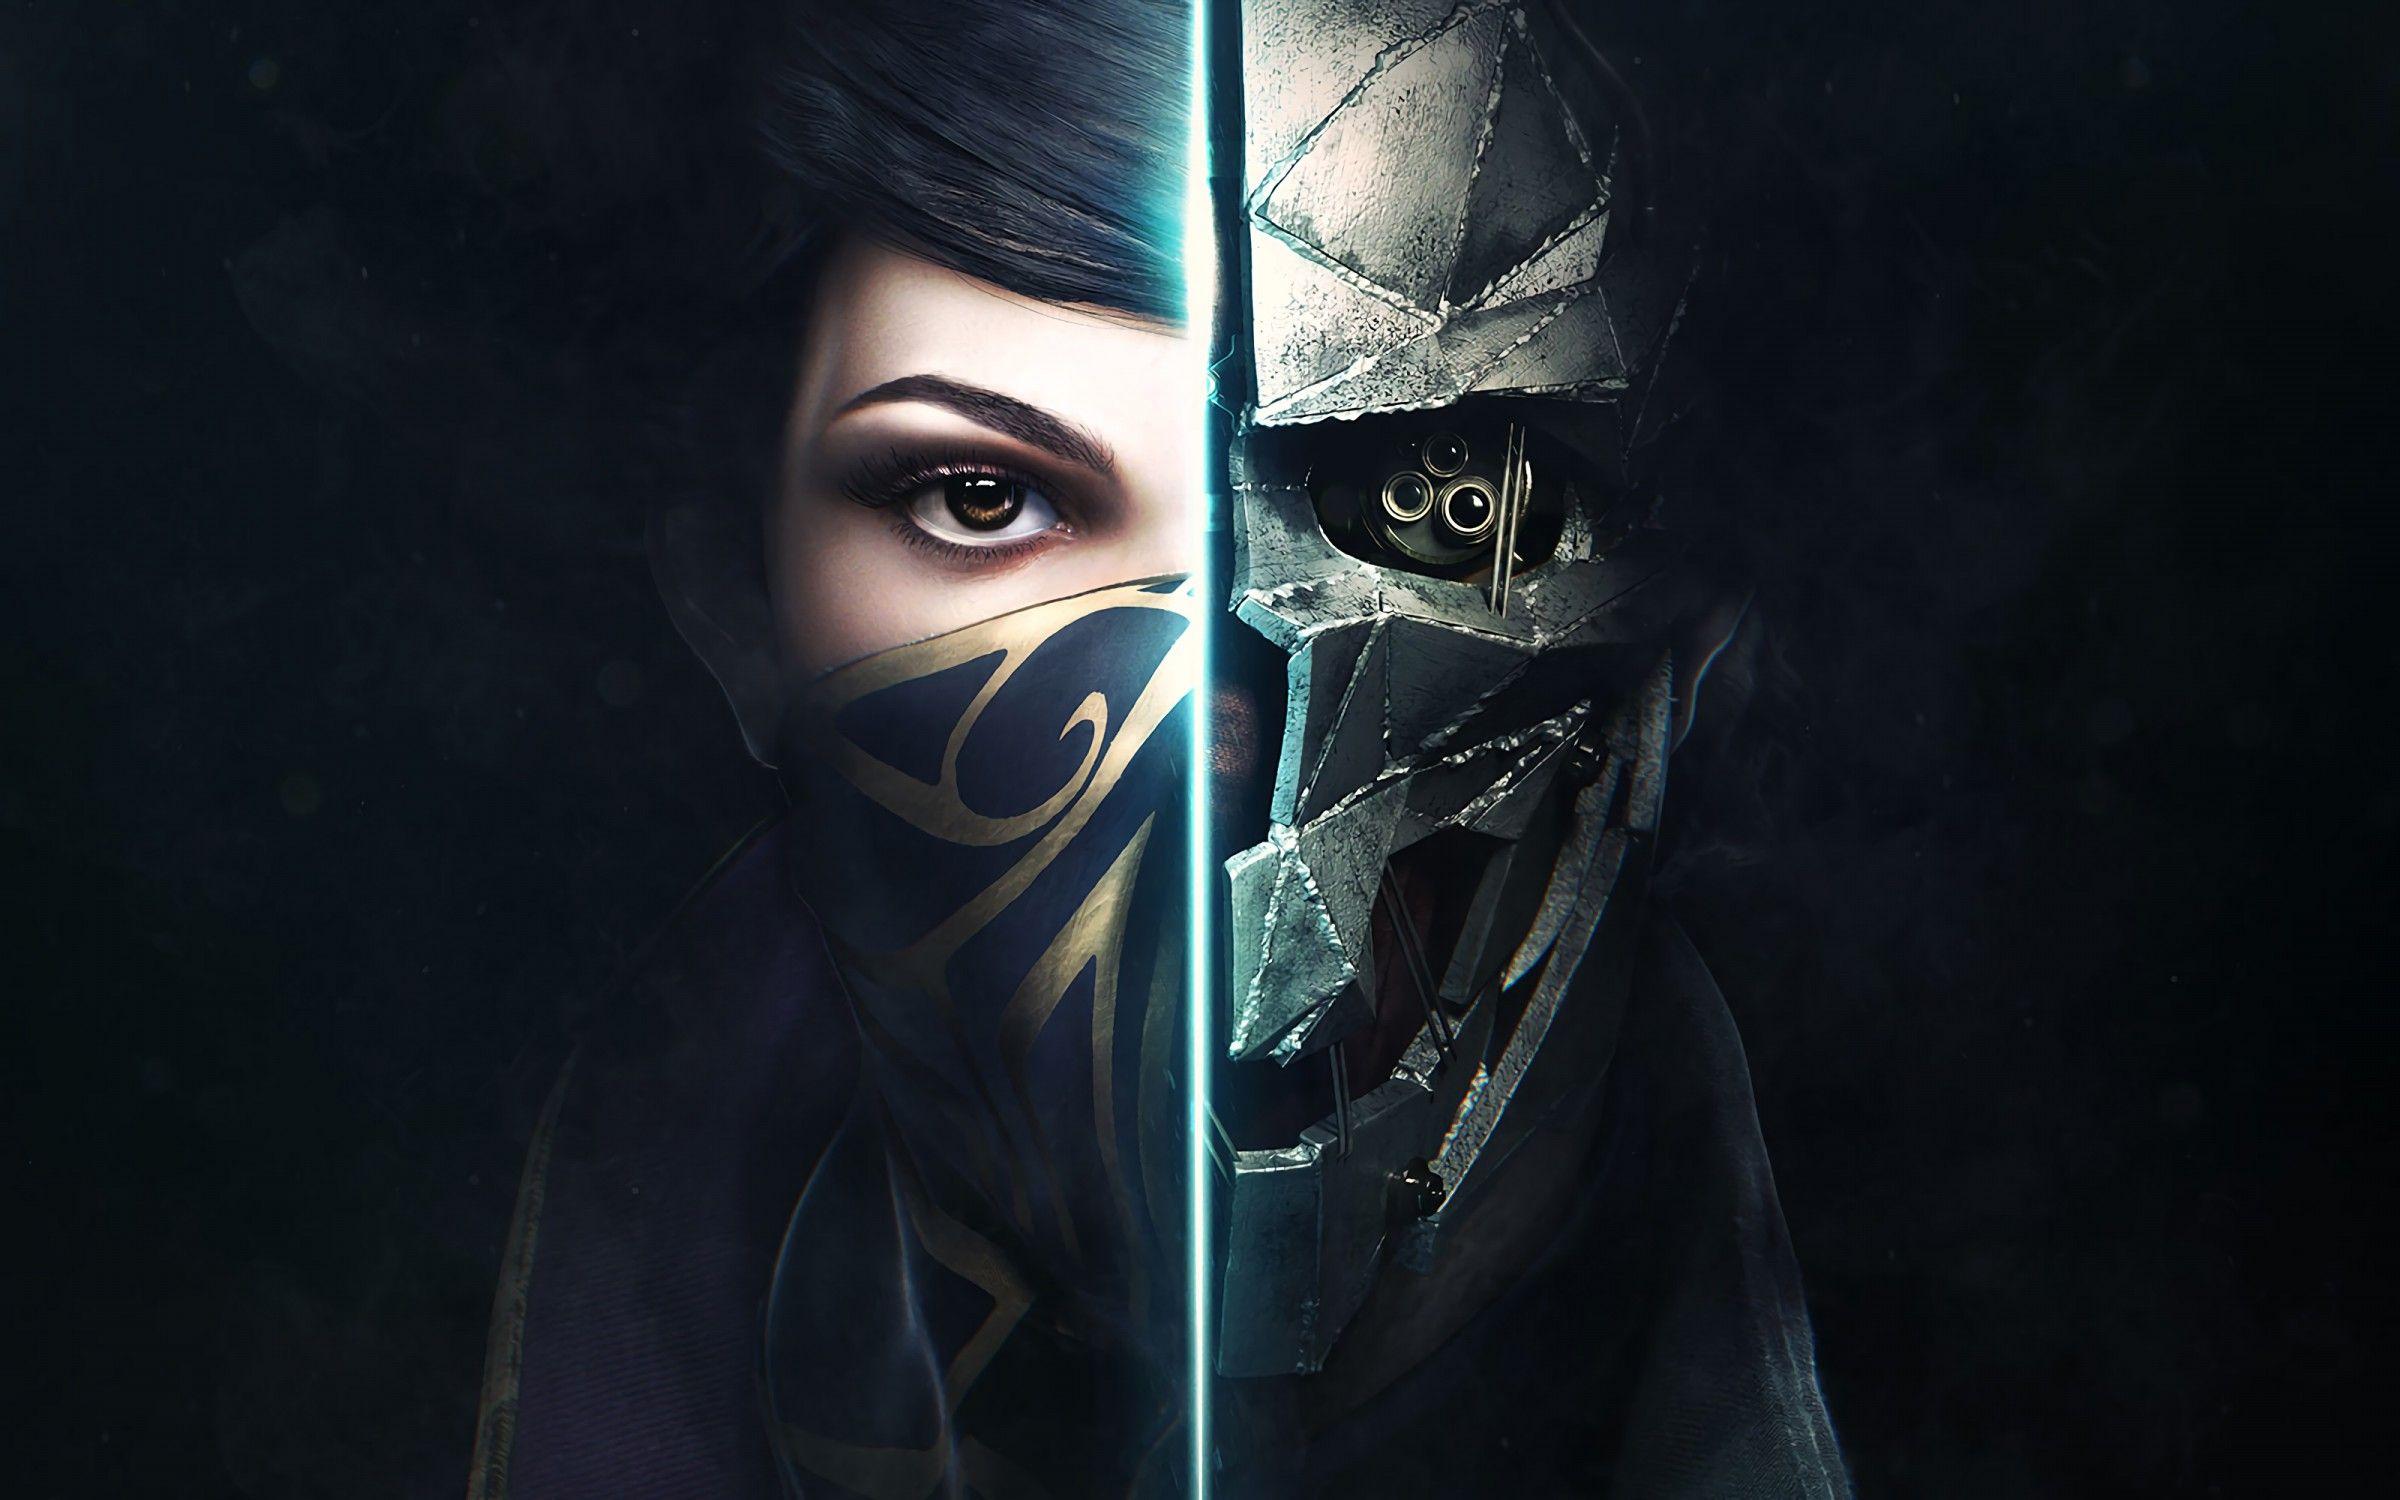 download free dishonored 2 ps5